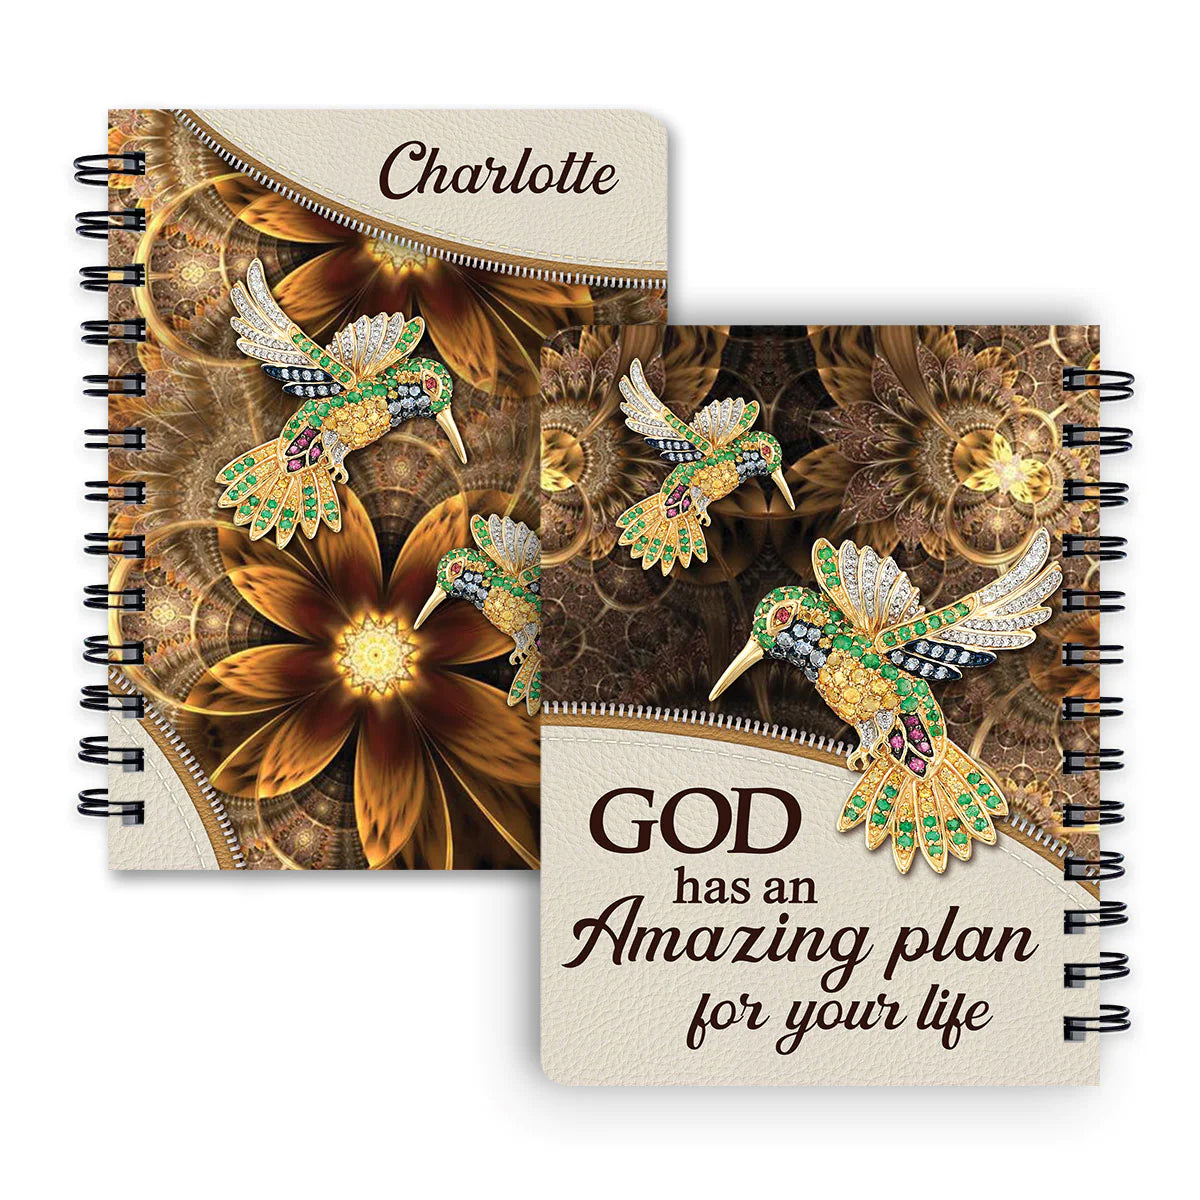 Christianart Spiral Journal, God Has An Amazing Plan For Your Life, Personalized Spiral Journal, Jesus Spiral Journal. - Christian Art Bag